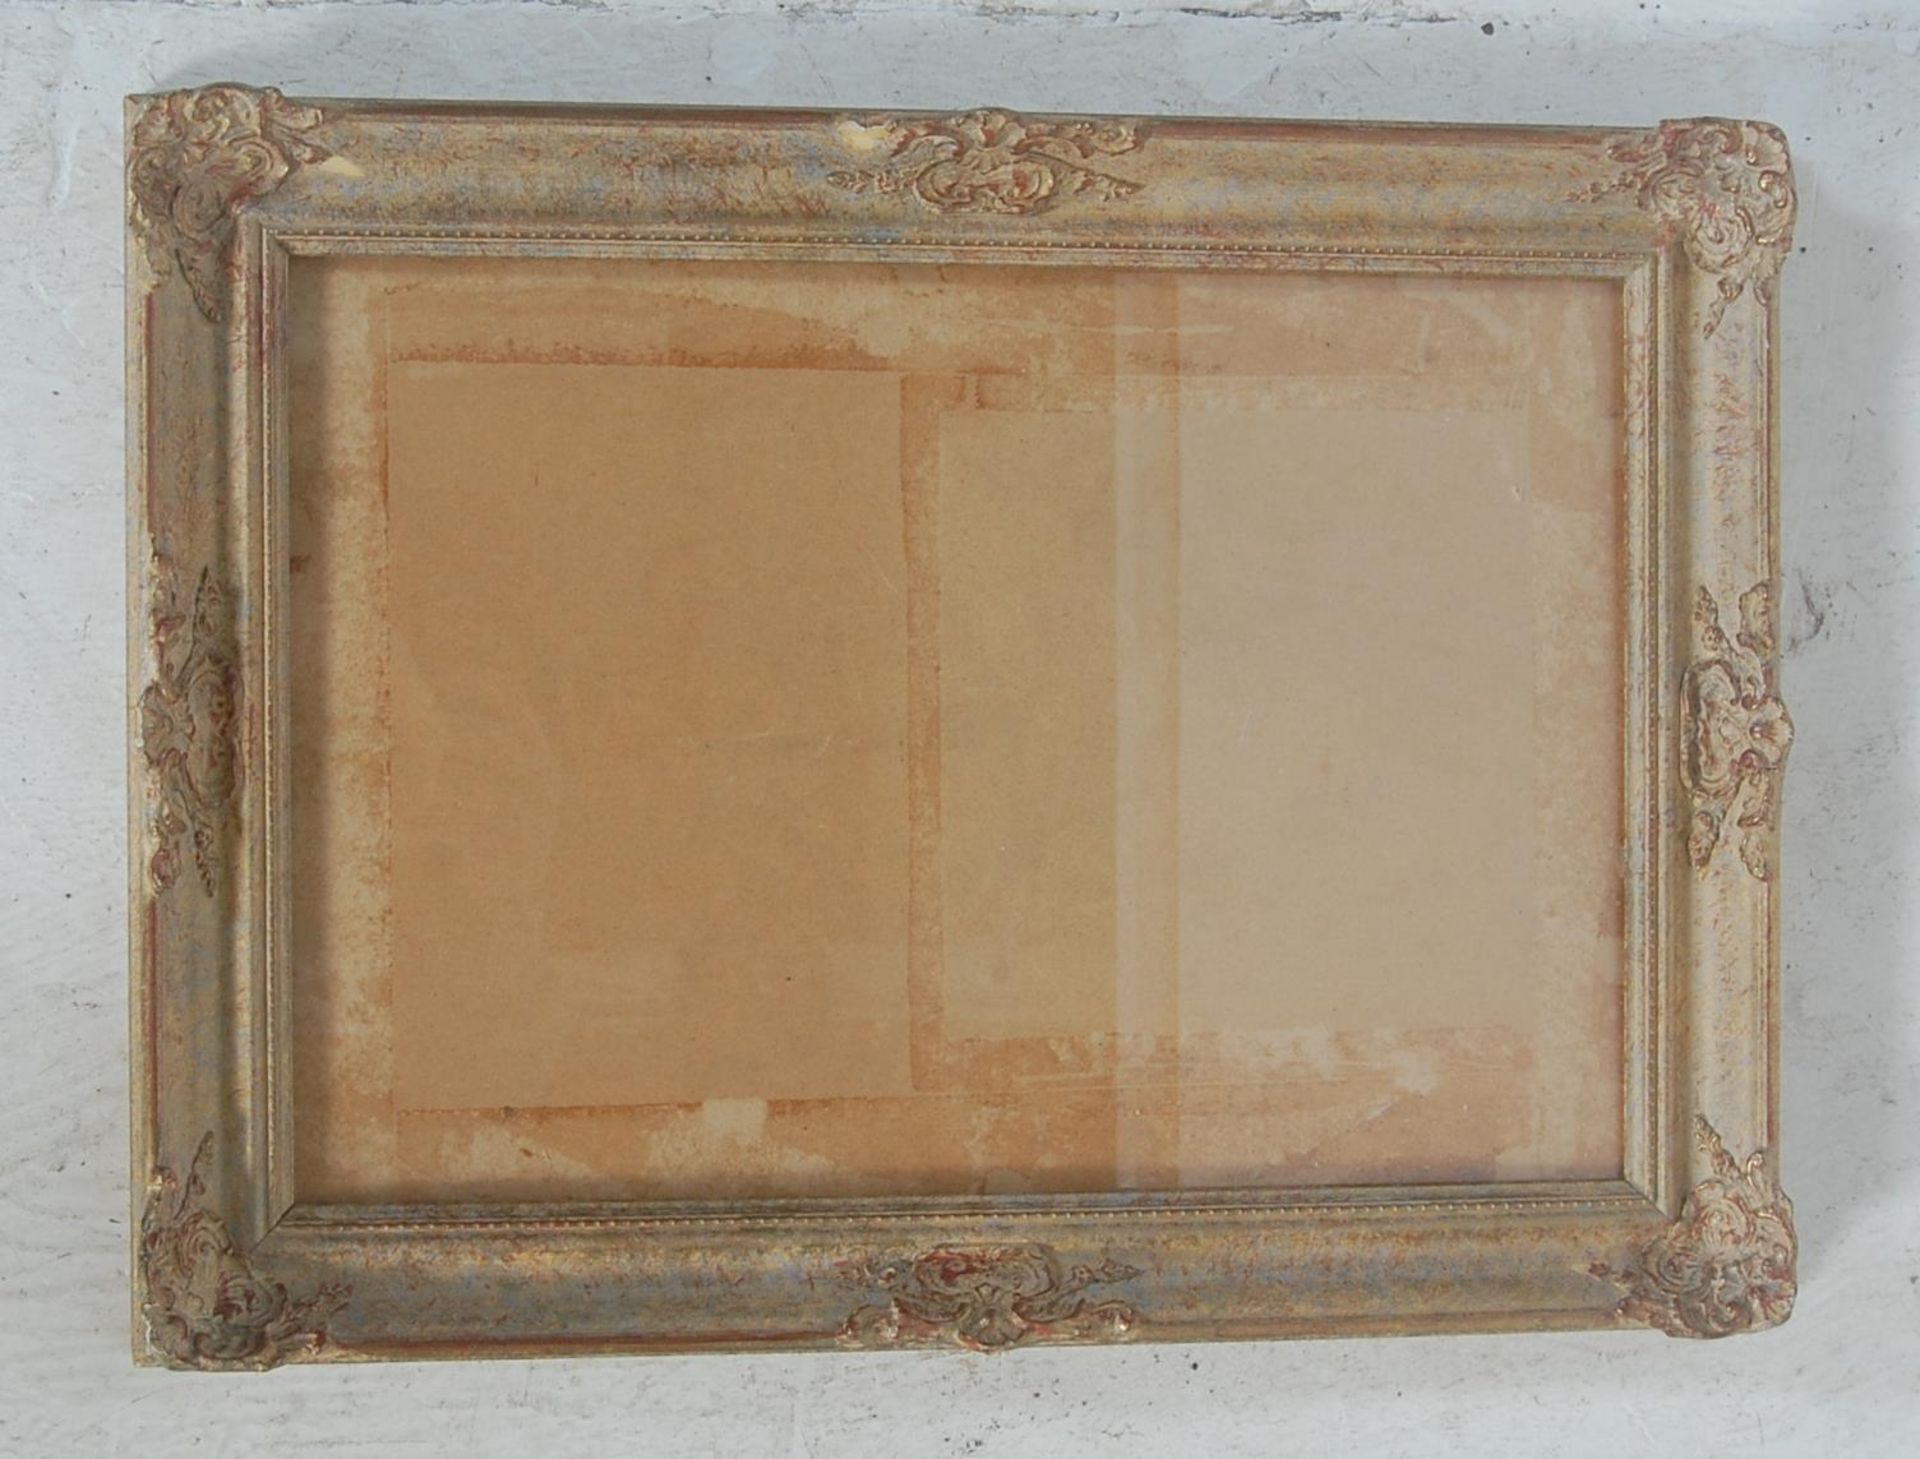 FOUR VINTAGE 20TH CENTURY BAROQUE STYLE GILDED PICTURE FRAMES - Image 8 of 25